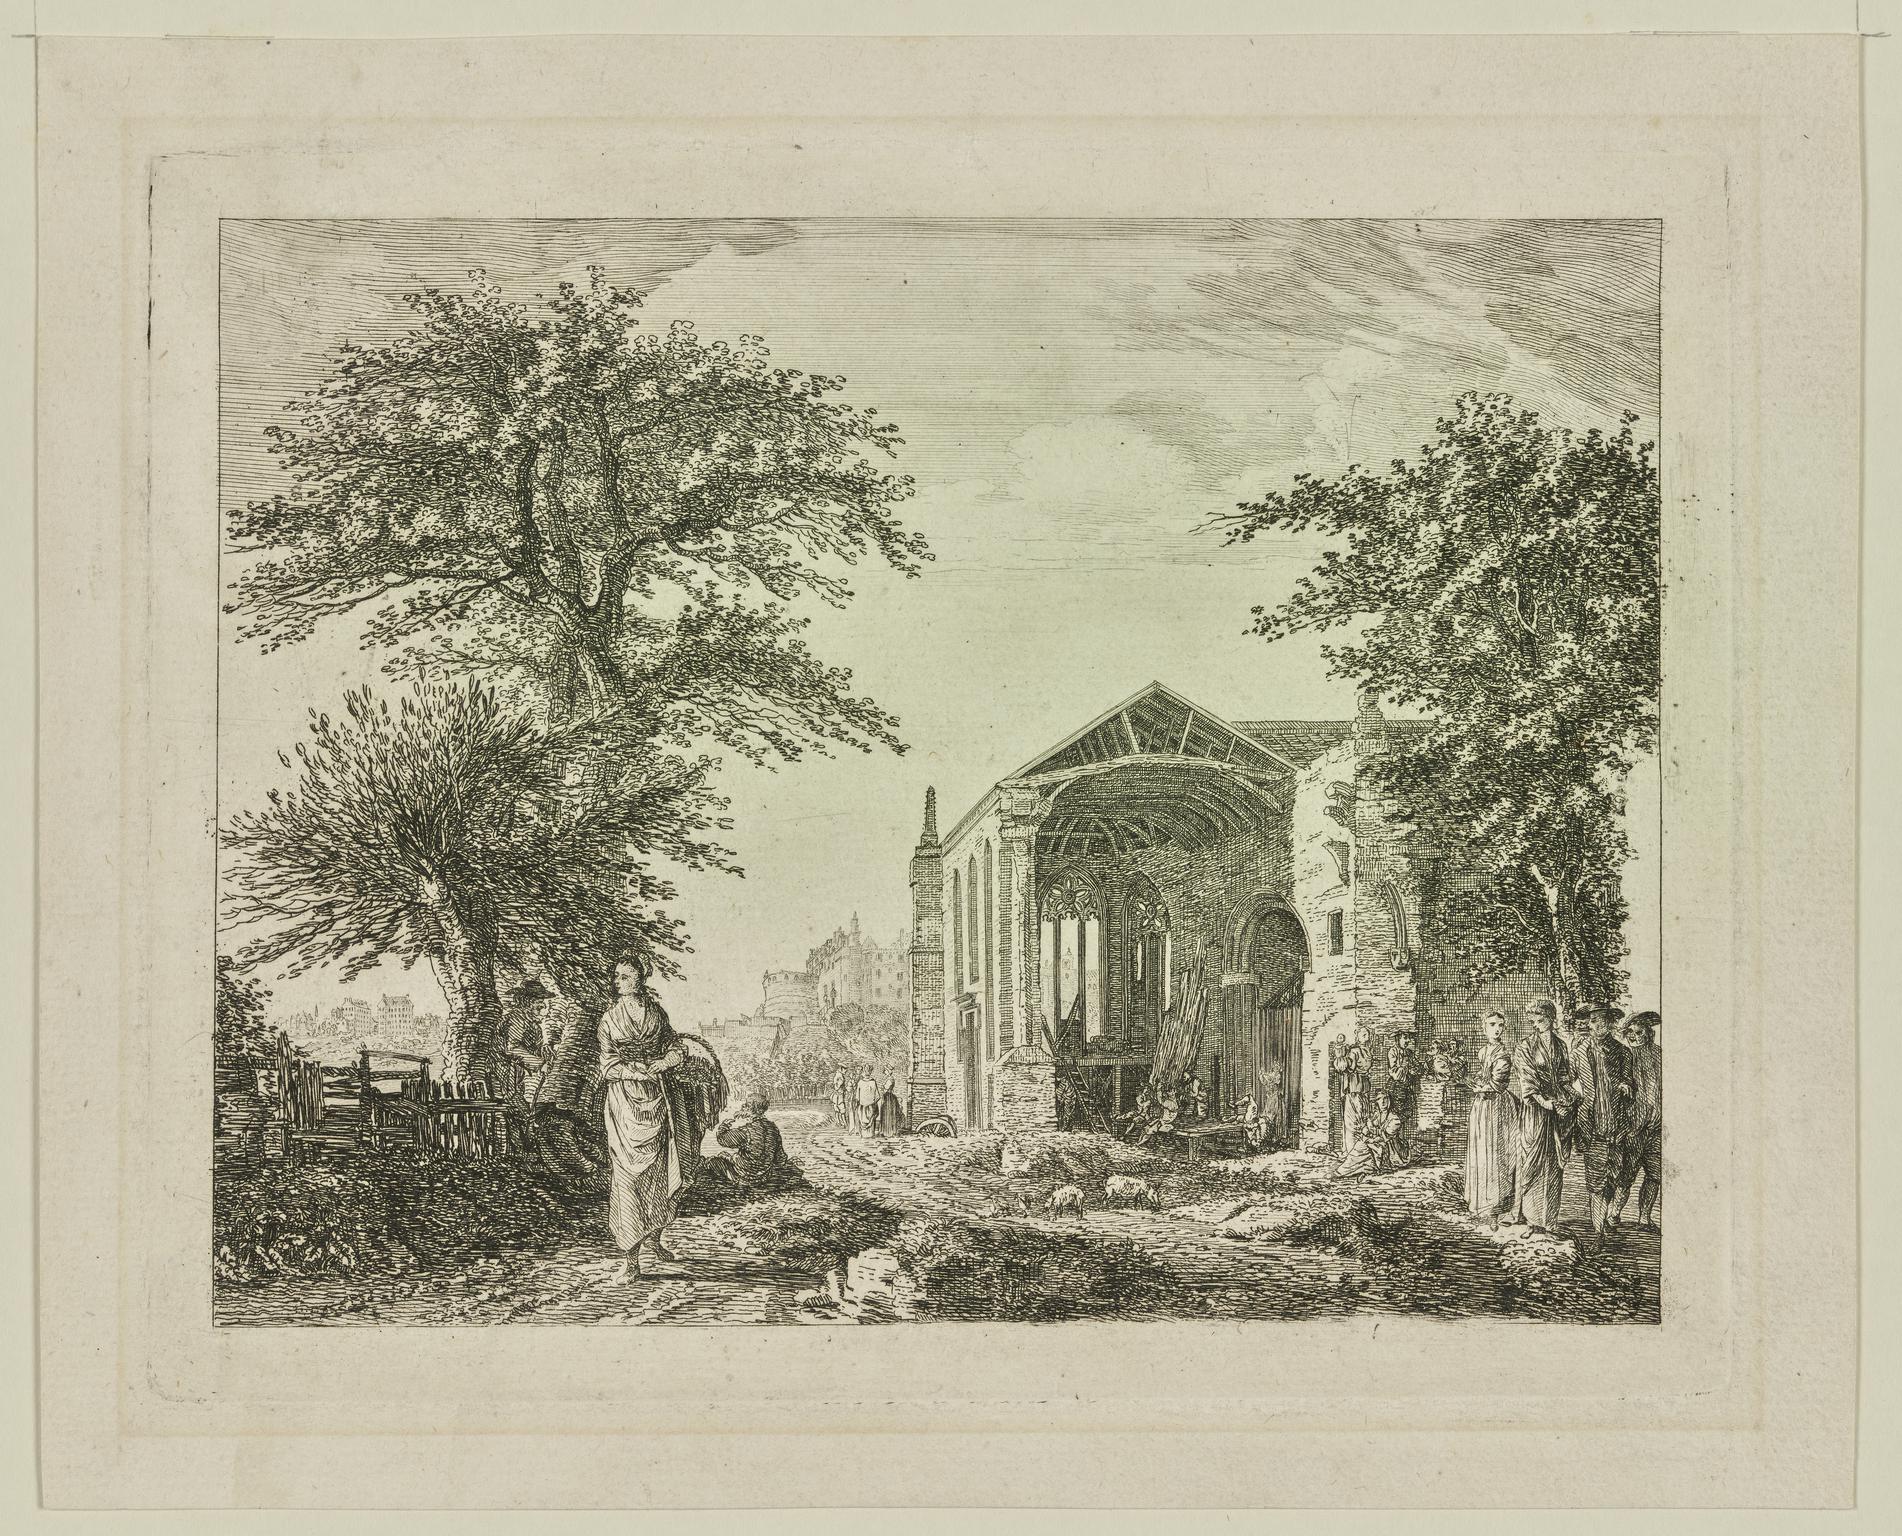 Landscape with Ruined Church and Figures